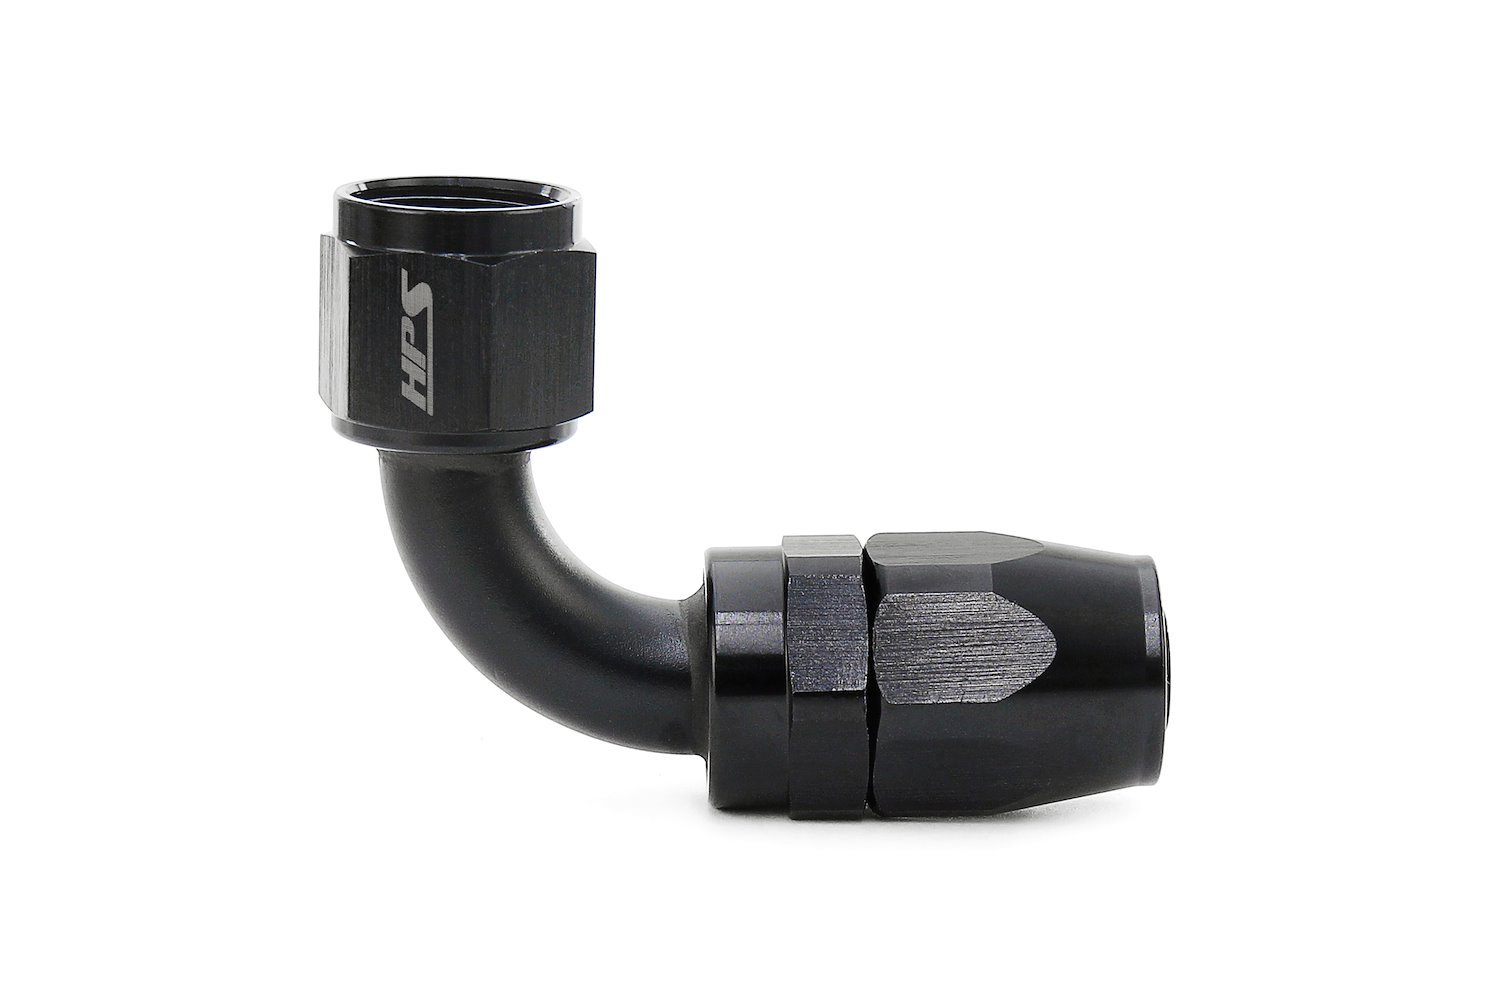 250-9012 250 Series 90-Deg Hose End, Reusable Compression Style Hose End Fitting, Easily Assembles w/ Hand Tools